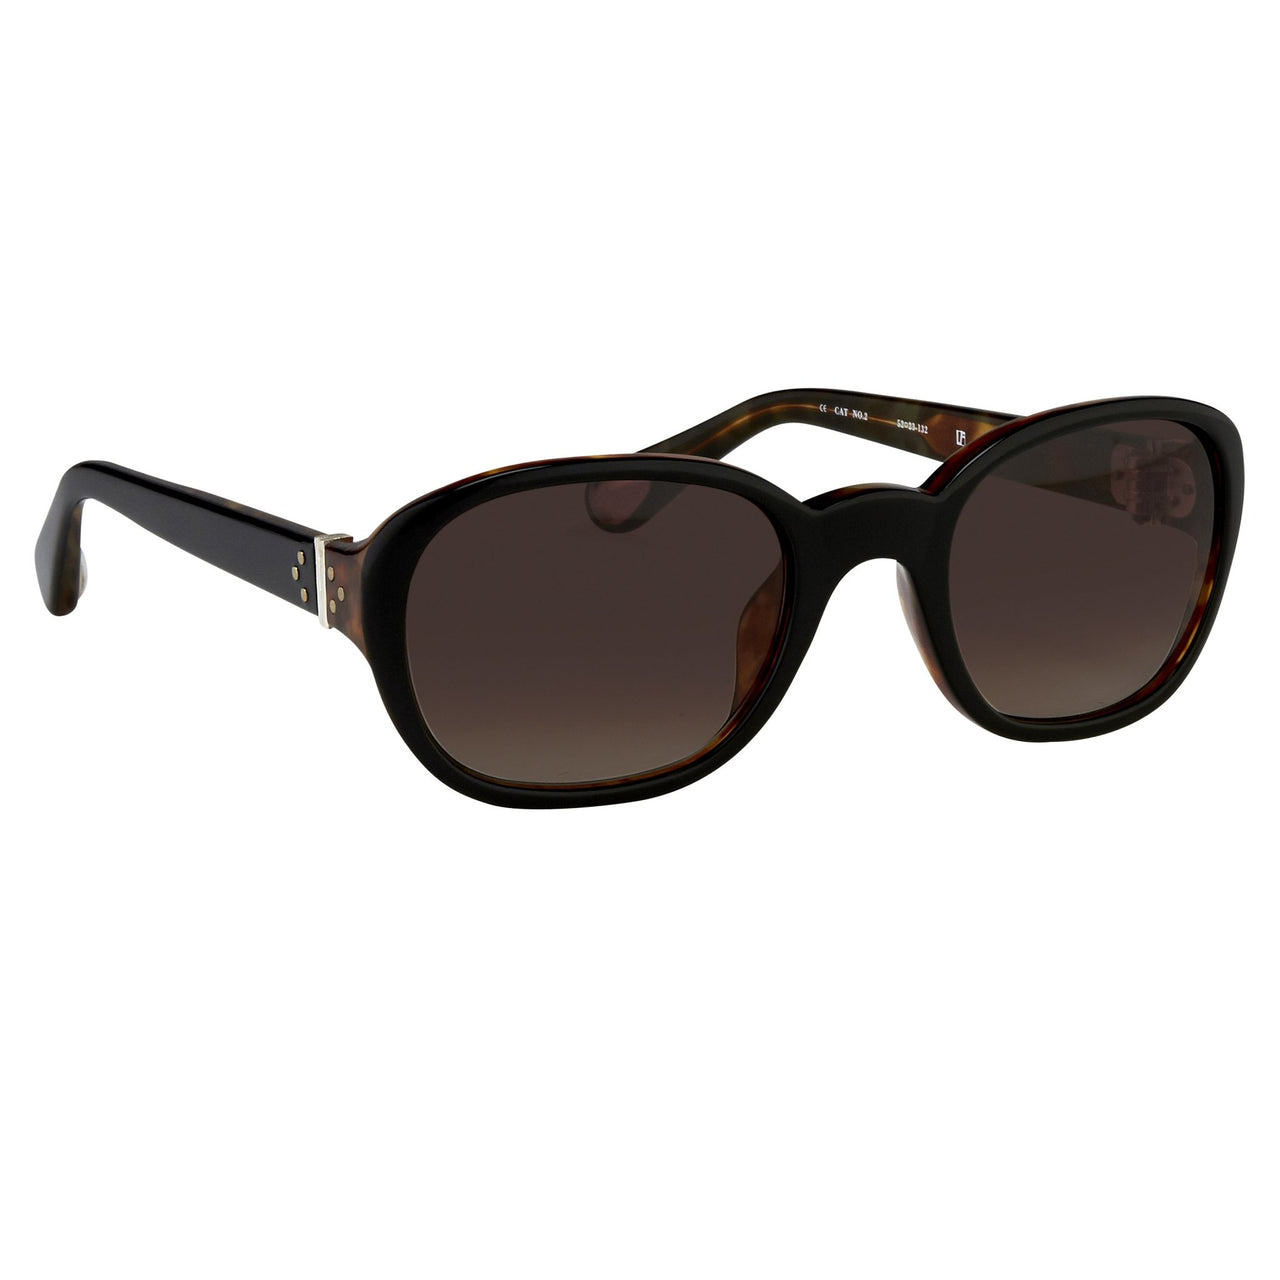 Ann Demeulemeester Sunglasses Oval Black & Tortoise Shell 925 Silver with Brown Graduated Lenses Category 3 AD8C6SUN - Watches & Crystals